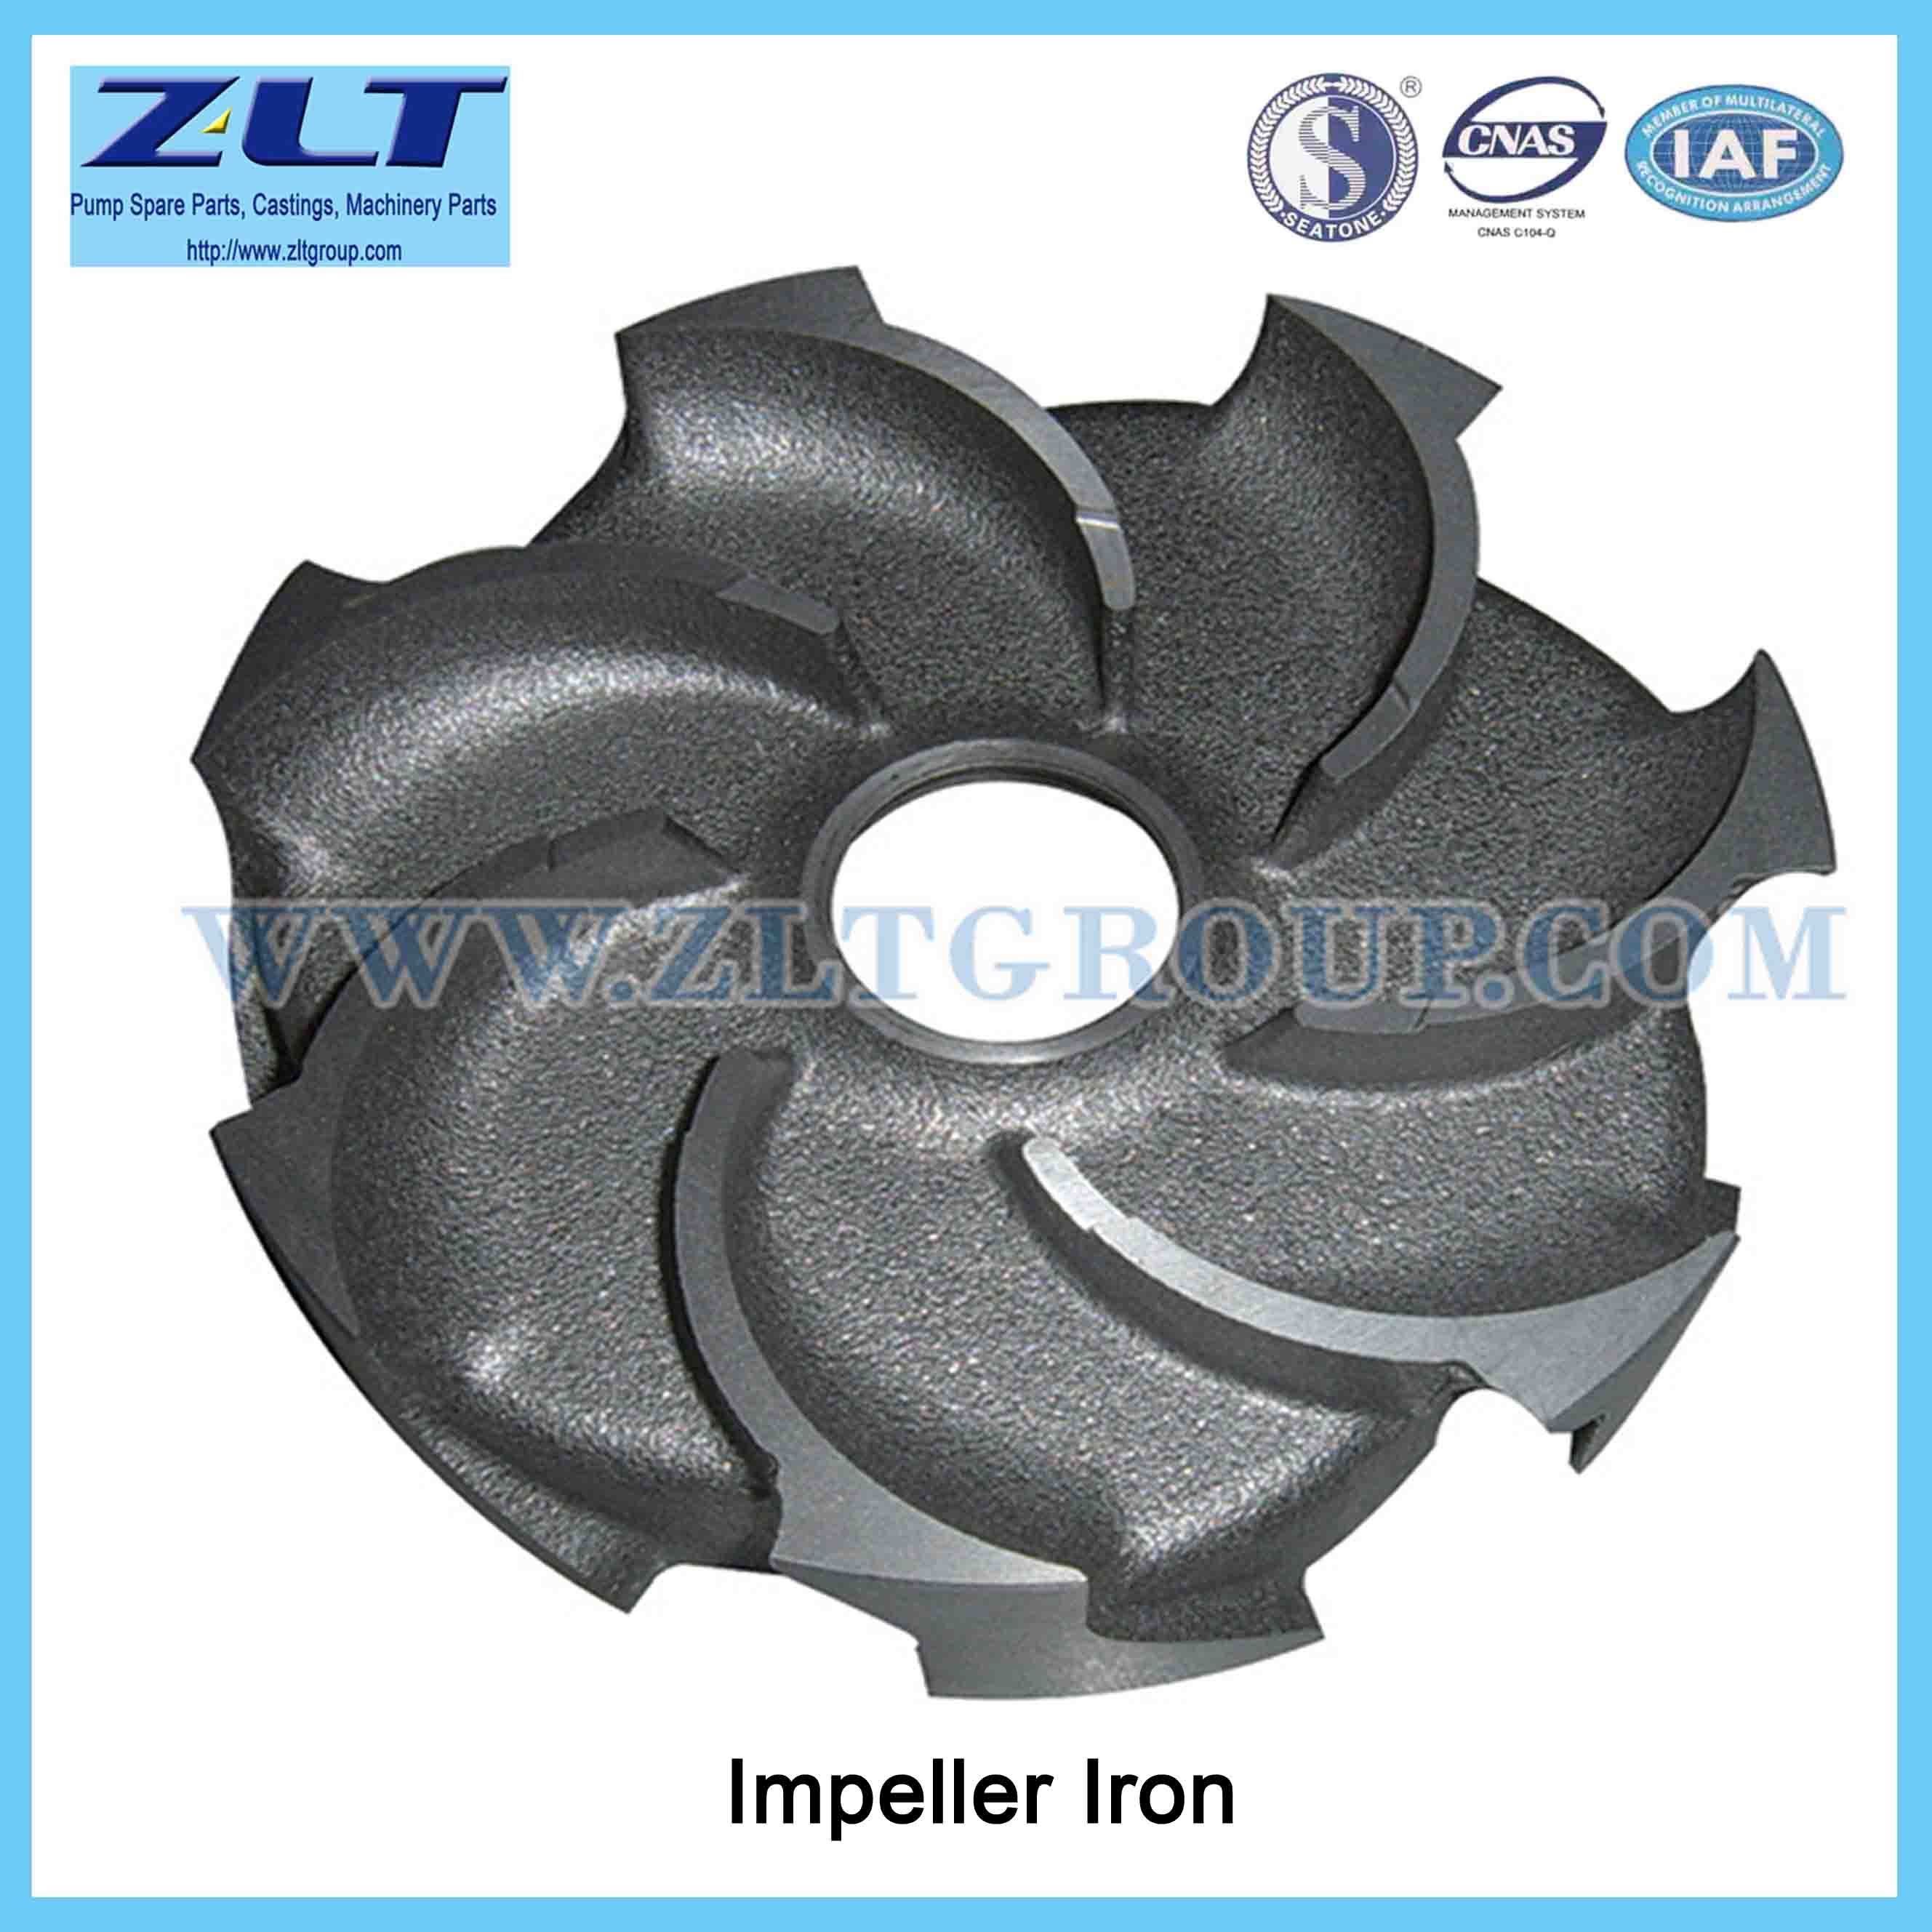 Investment Casting for Lost Wax Casting